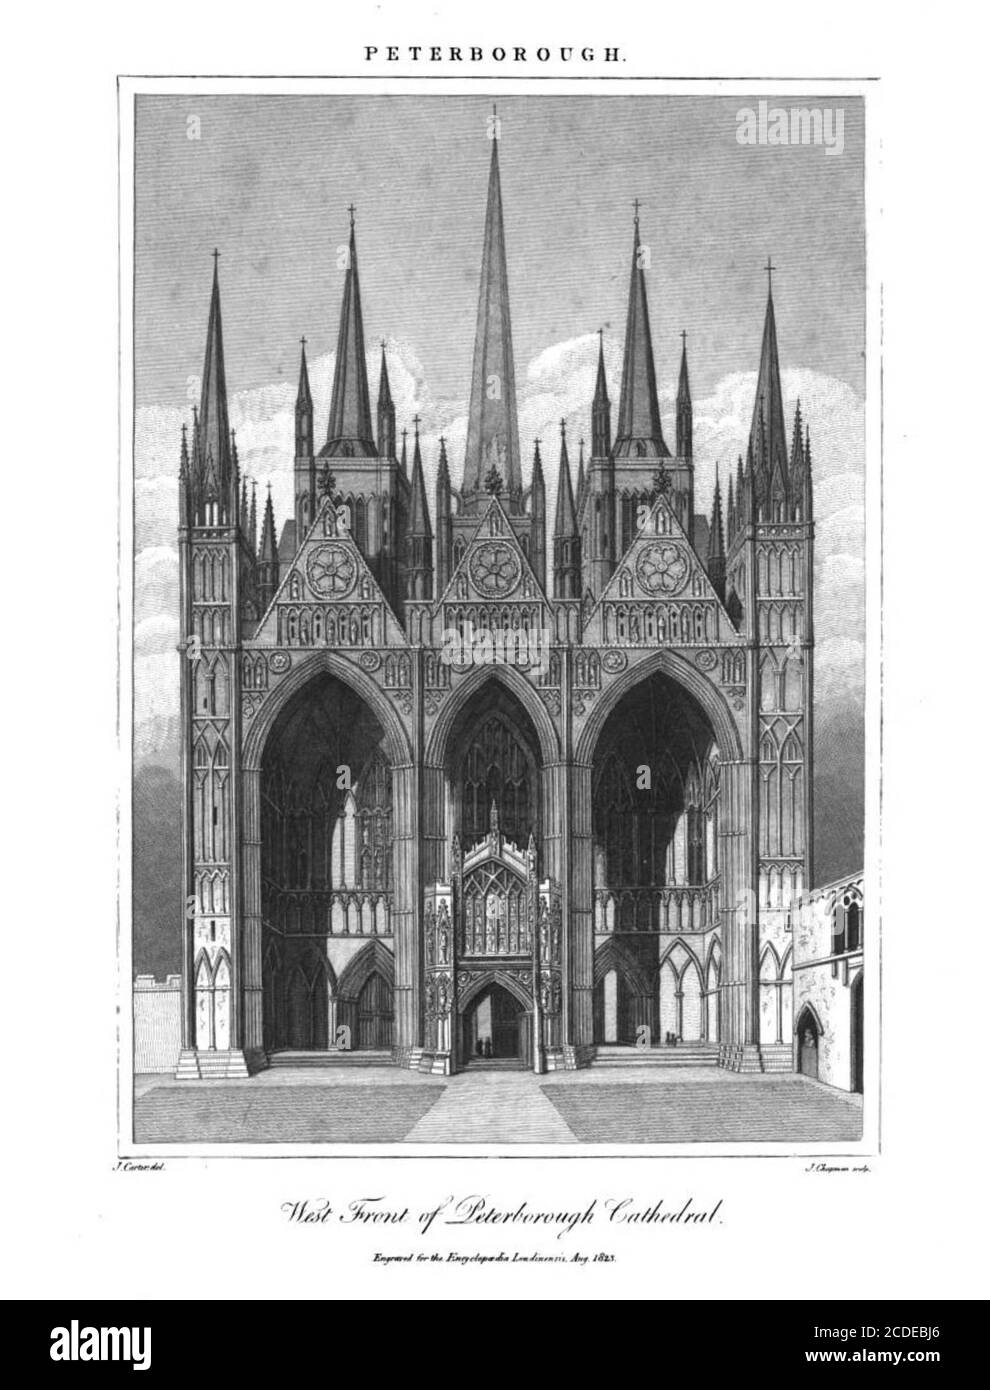 West Front of Peterborough Cathedral [Peterborough is a Cathedral City in Cambridgeshire, England], Kupferstich aus der Encyclopedia Londinensis OR, Universal Dictionary of Arts, Sciences, and literature; Band XIX; herausgegeben von Wilkes, John. Veröffentlicht 1823 in London Stockfoto